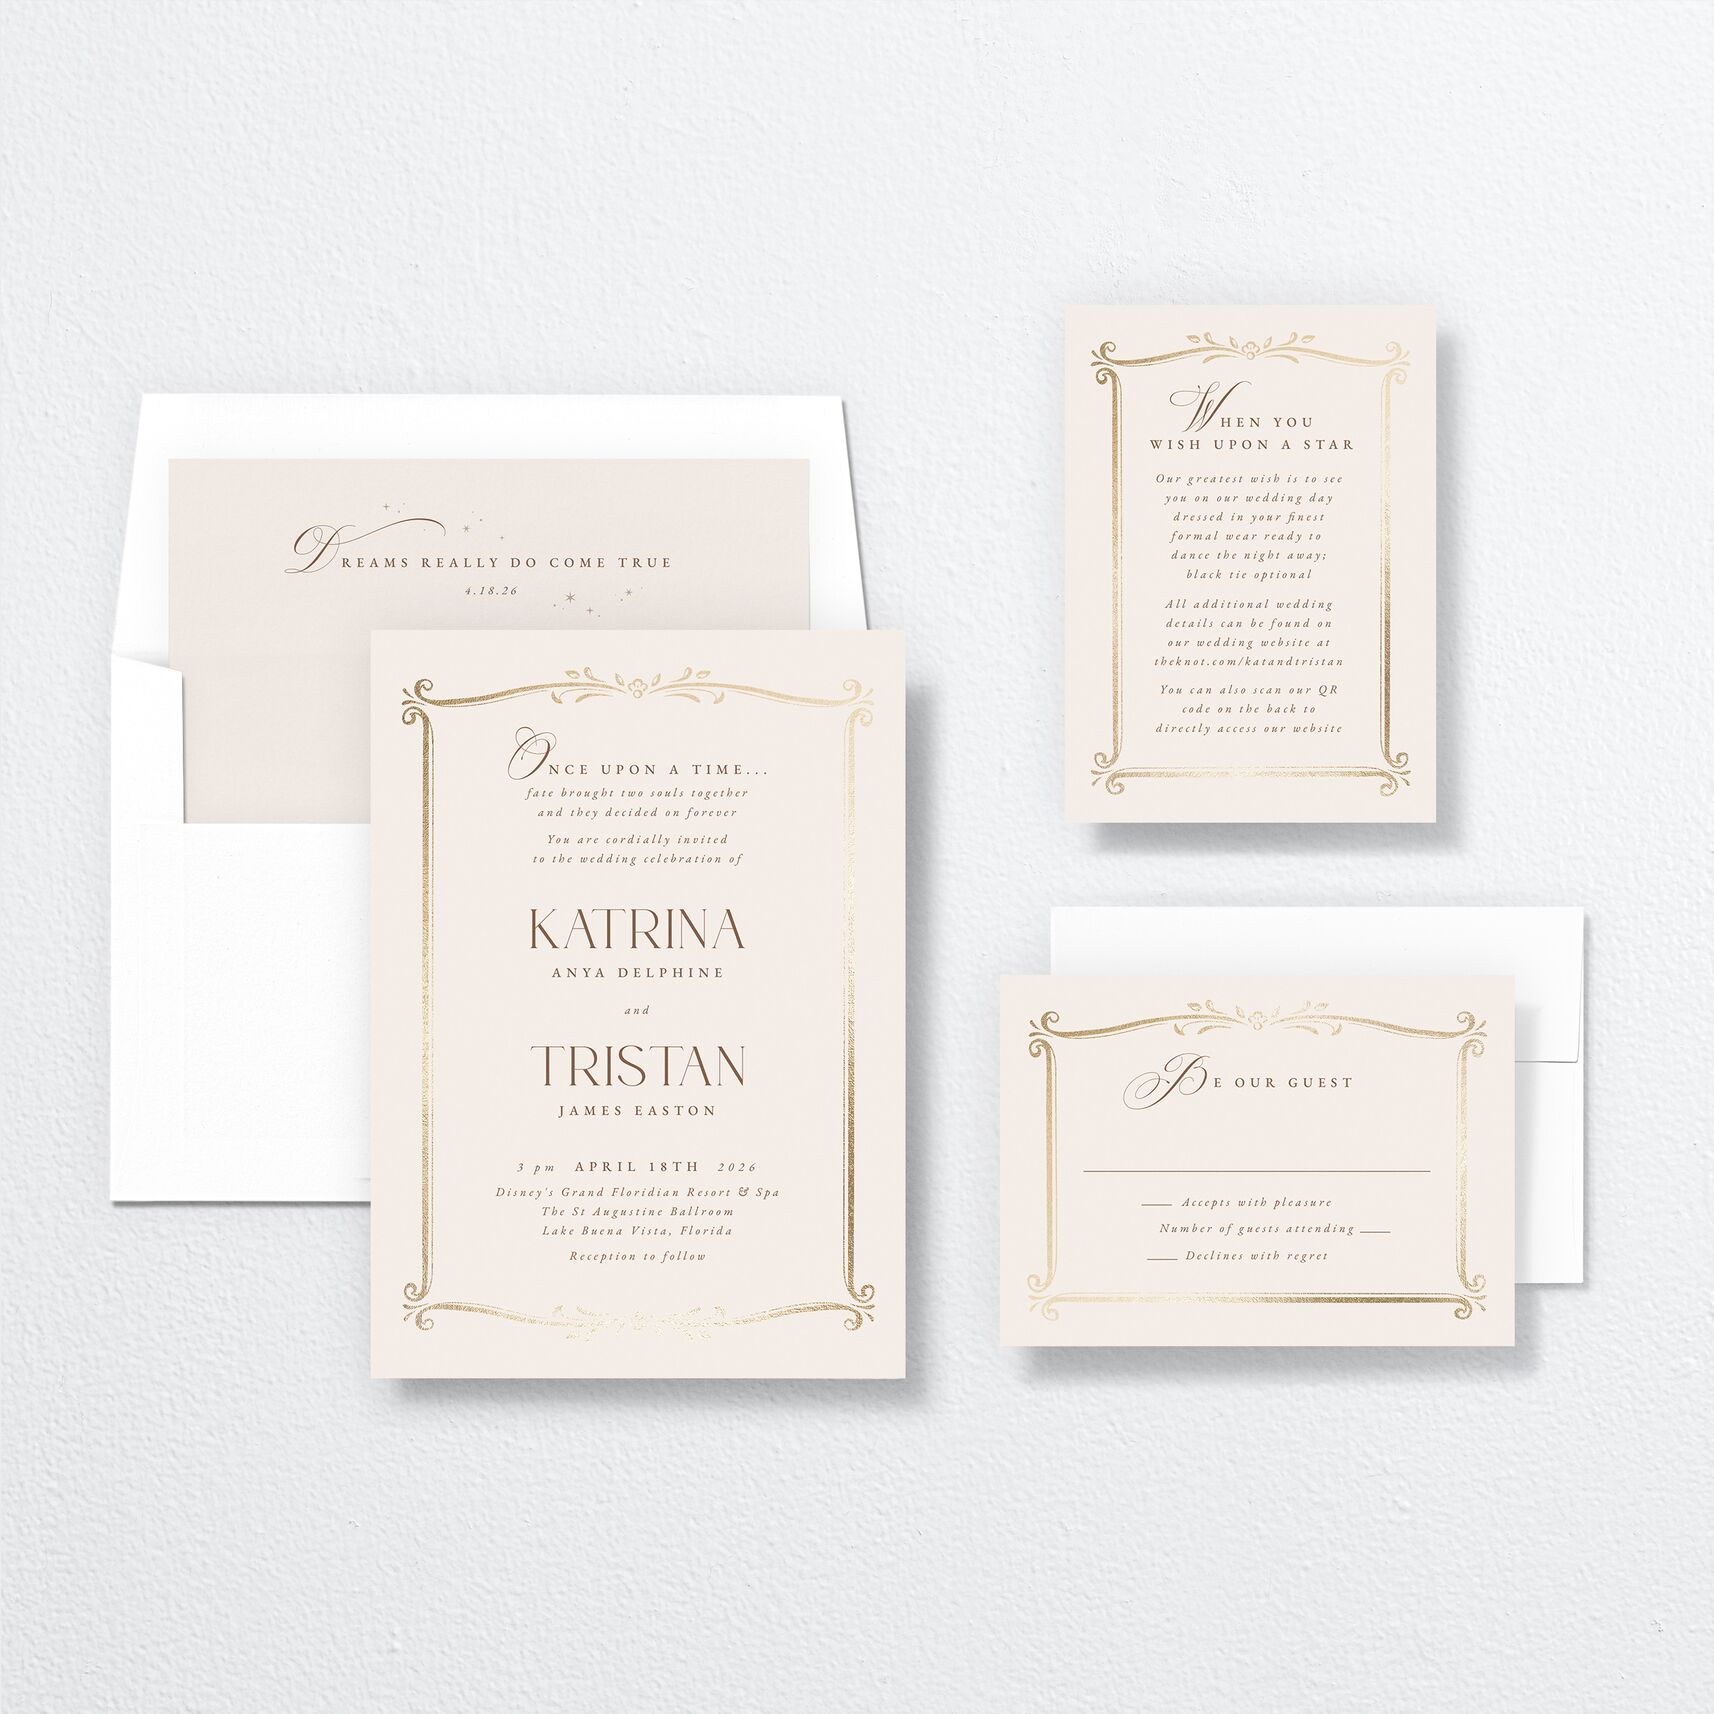 Fairytale Frame Wedding Invitations suite in white